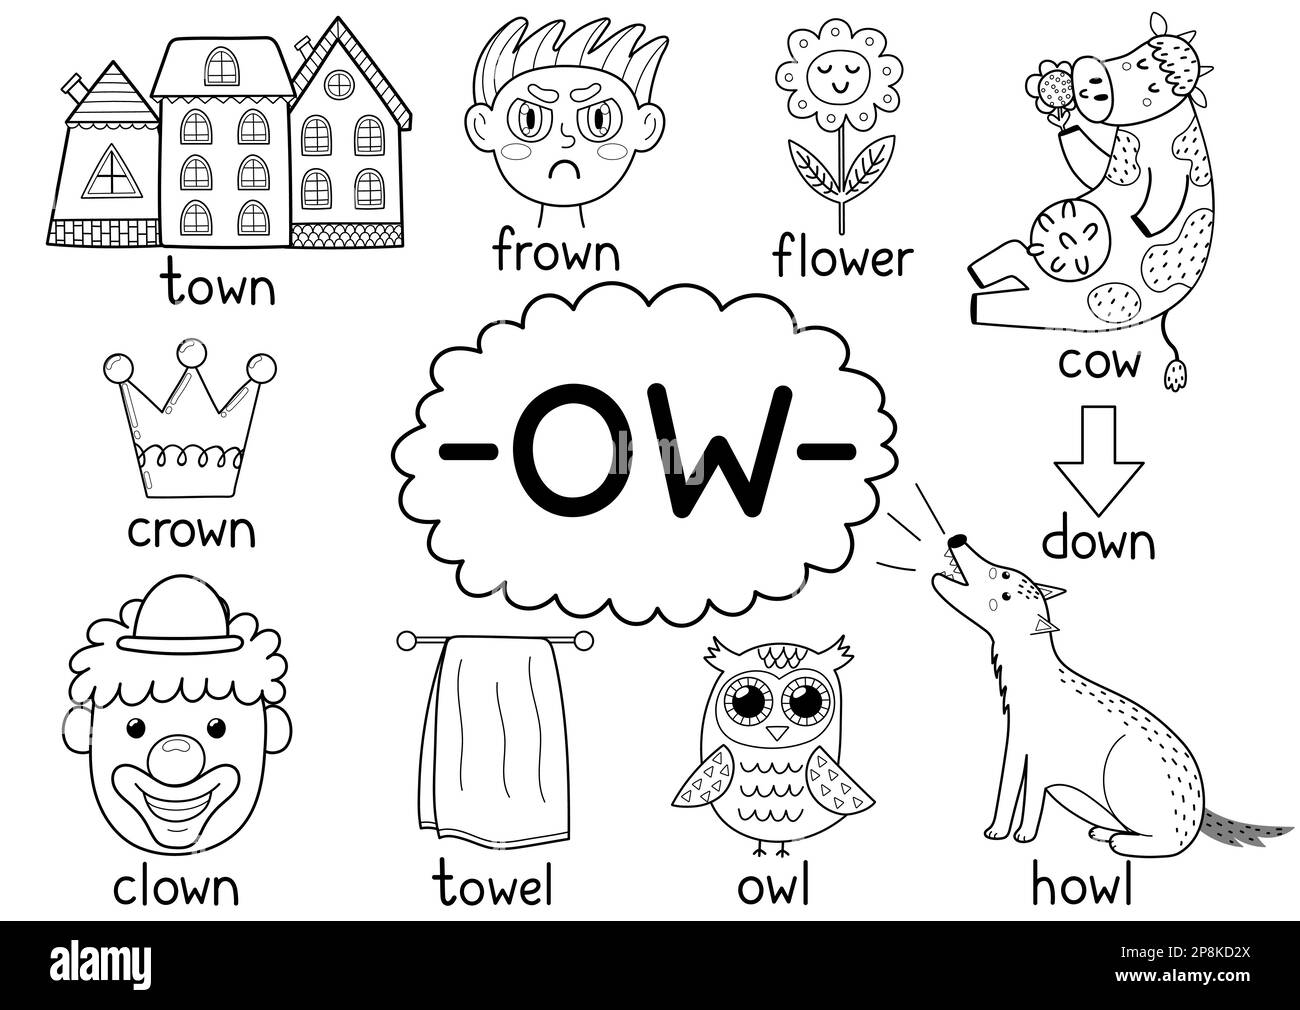 Ow digraph spelling rule black and white educational poster for kids with words Stock Vector